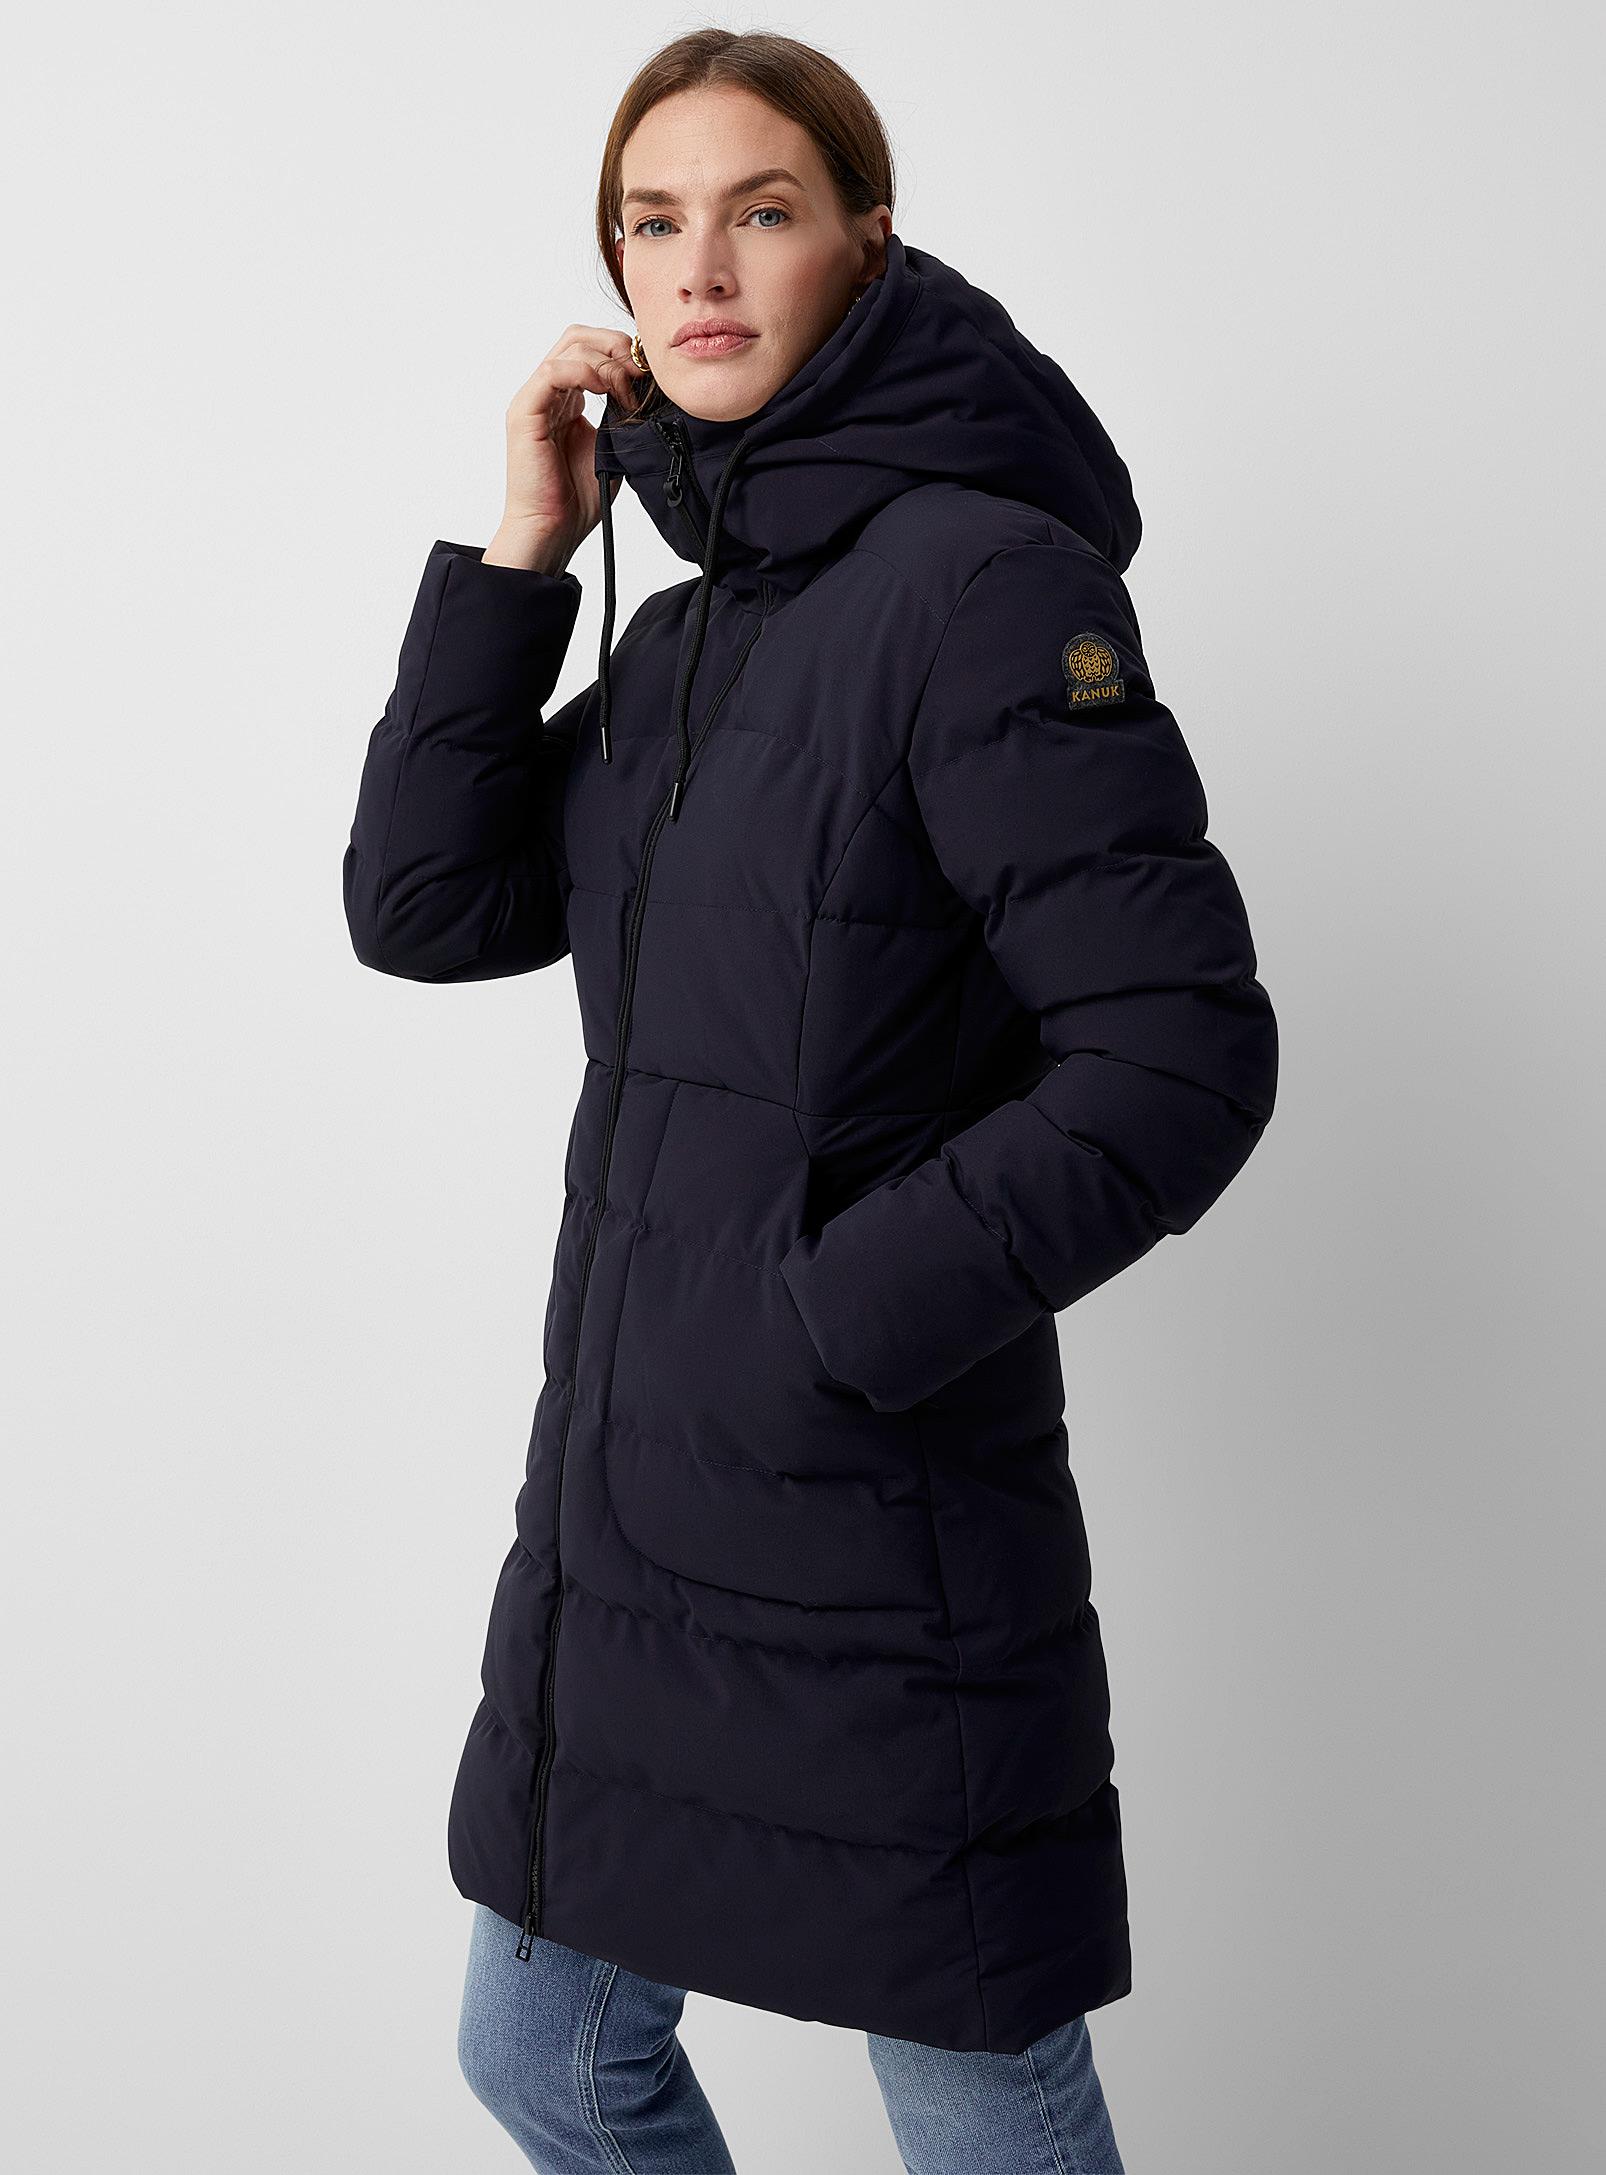 Kanuk Notting Hill Fitted Puffer Jacket in Blue | Lyst